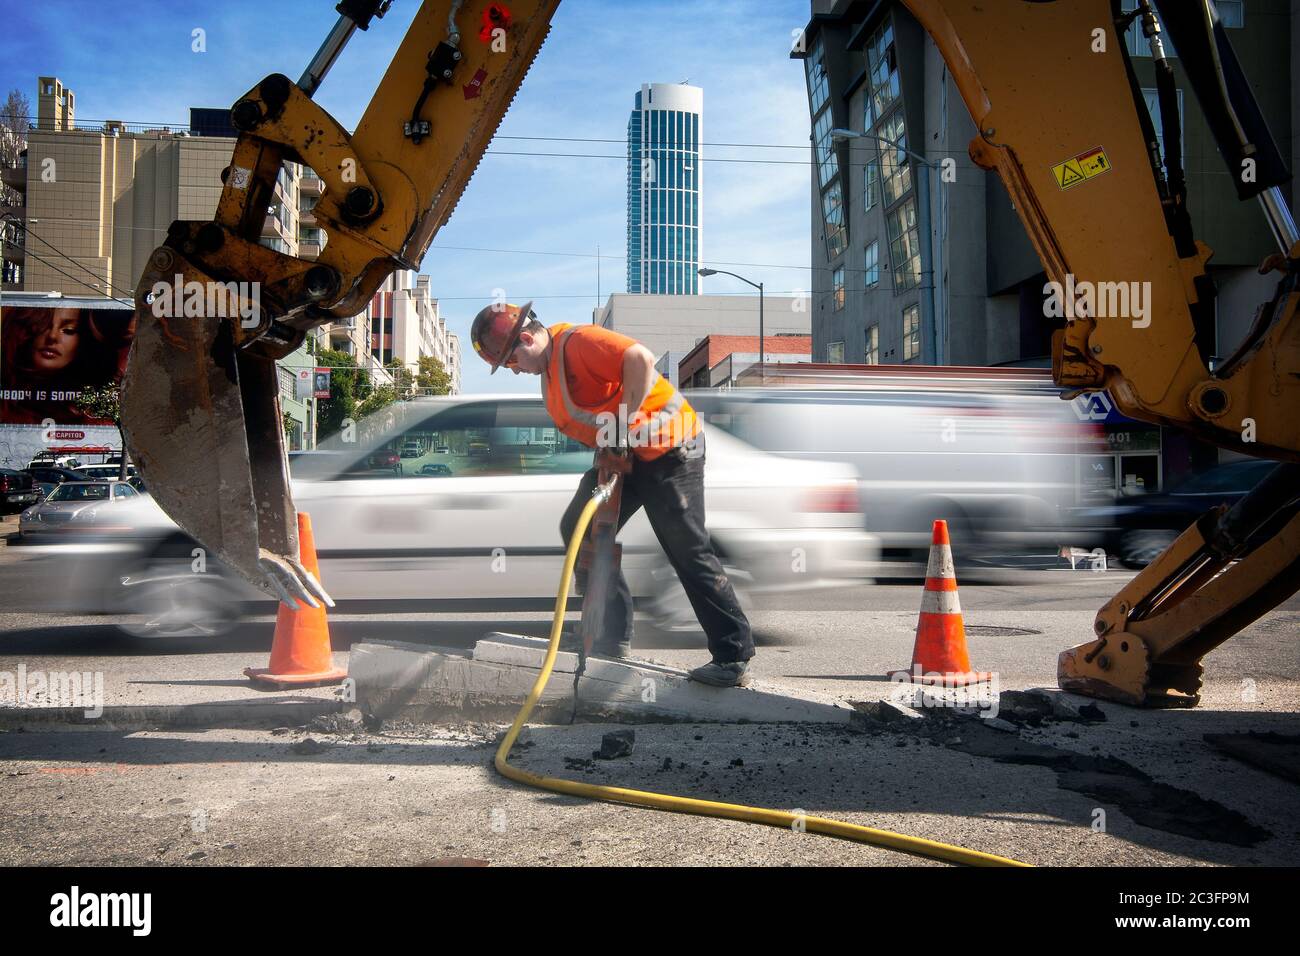 A construction worker uses a jackhammer to break concrete in San Francisco, California Stock Photo